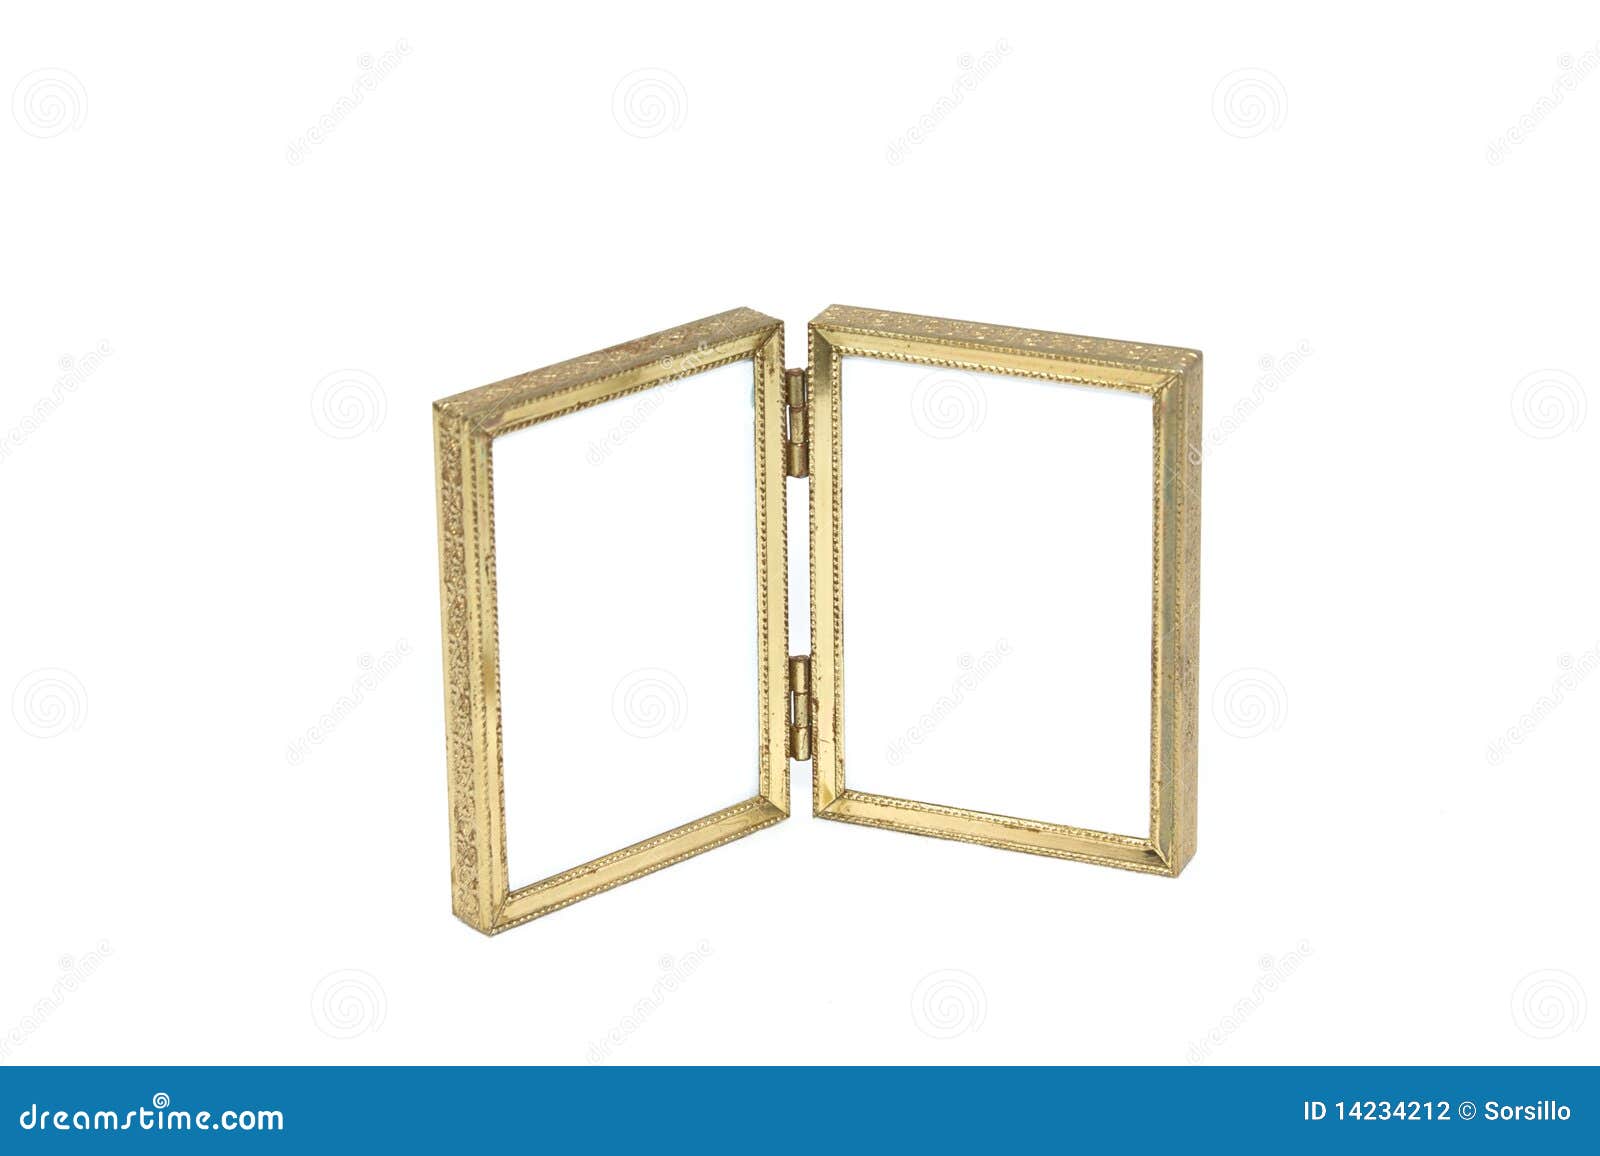 Two Sided Antique Picture Frame Stock Photography - Image: 14234212 - Two sided antique picture frame